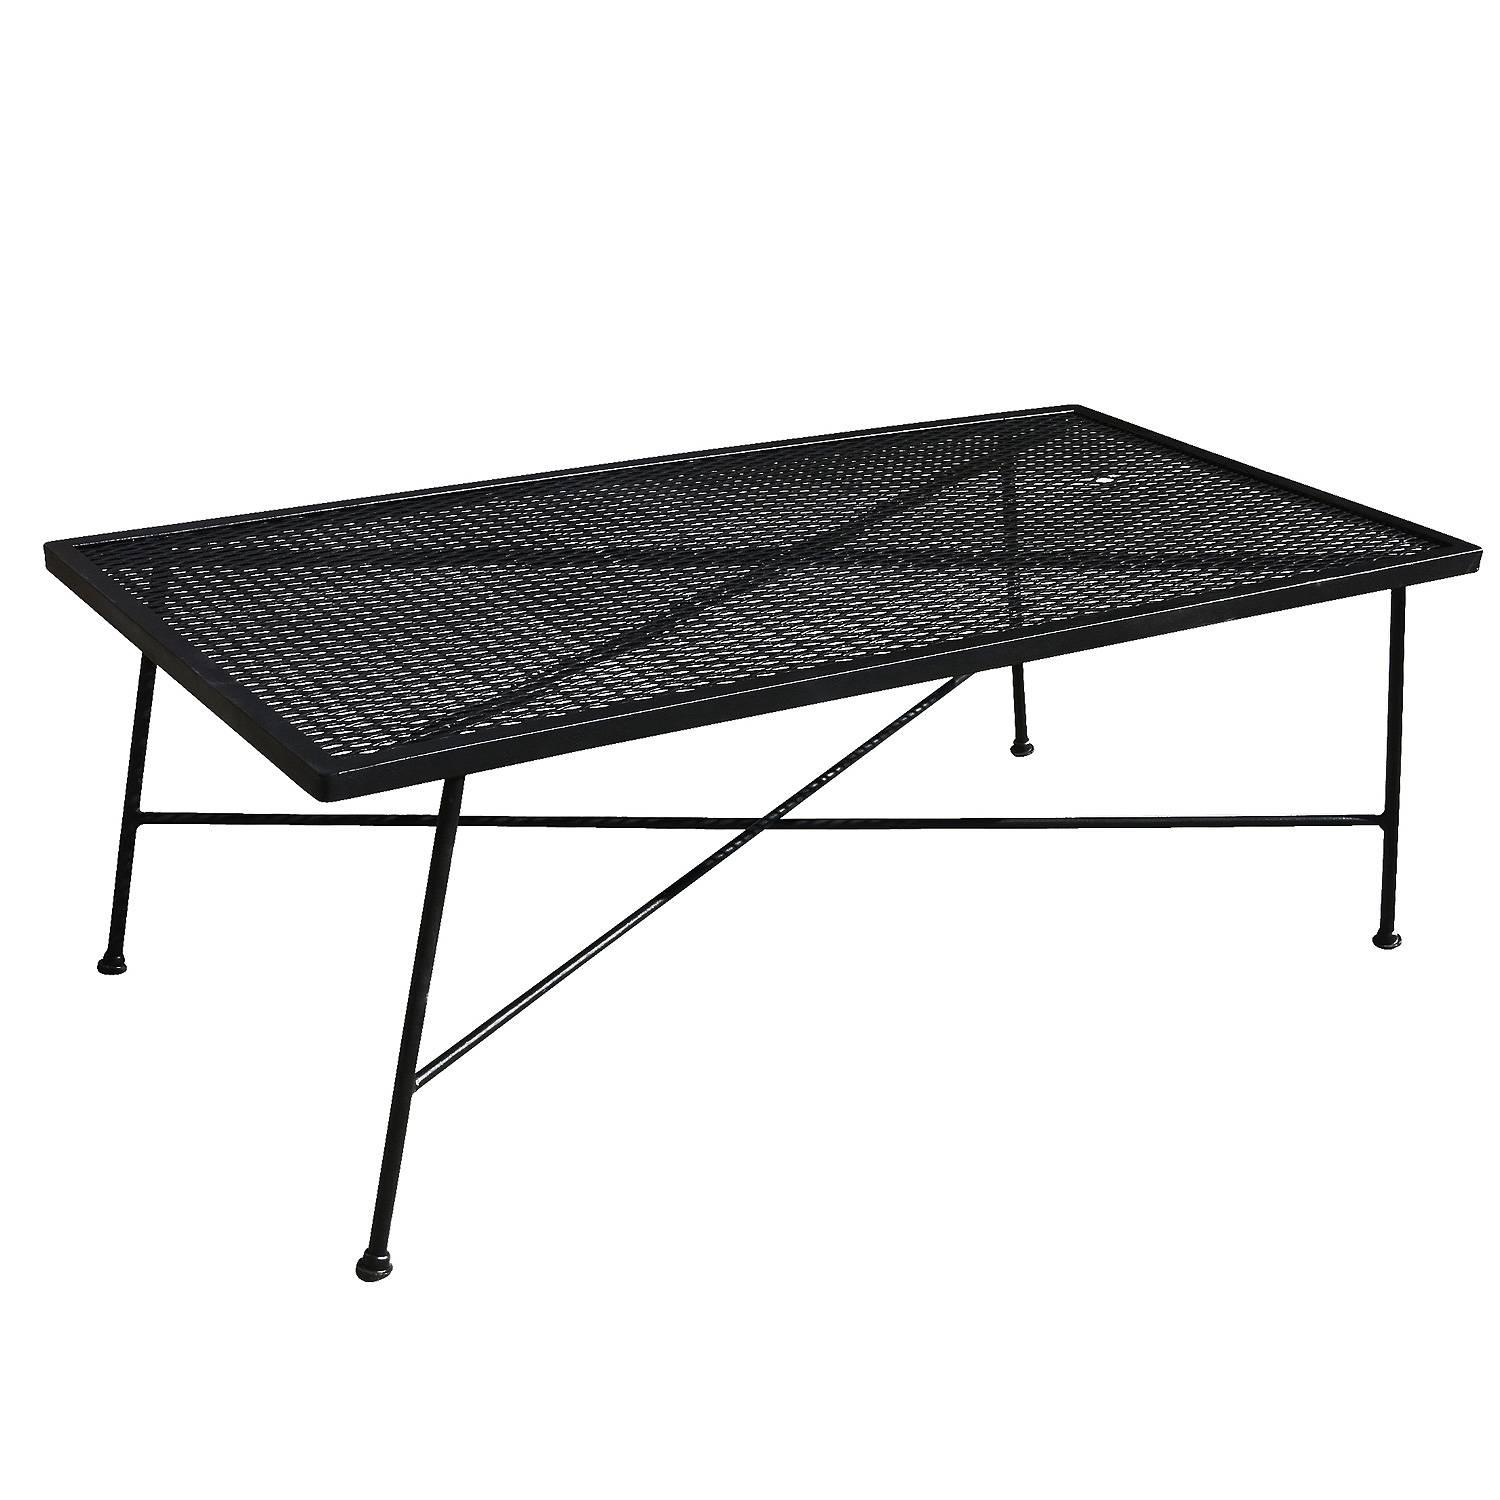 Vintage Outdoor/Patio patio coffee table with iron base and steel mesh top by the Woodward company. Table has been repainted in black but can be repainted in your choice of color.

circa 1950, USA by Woodard.